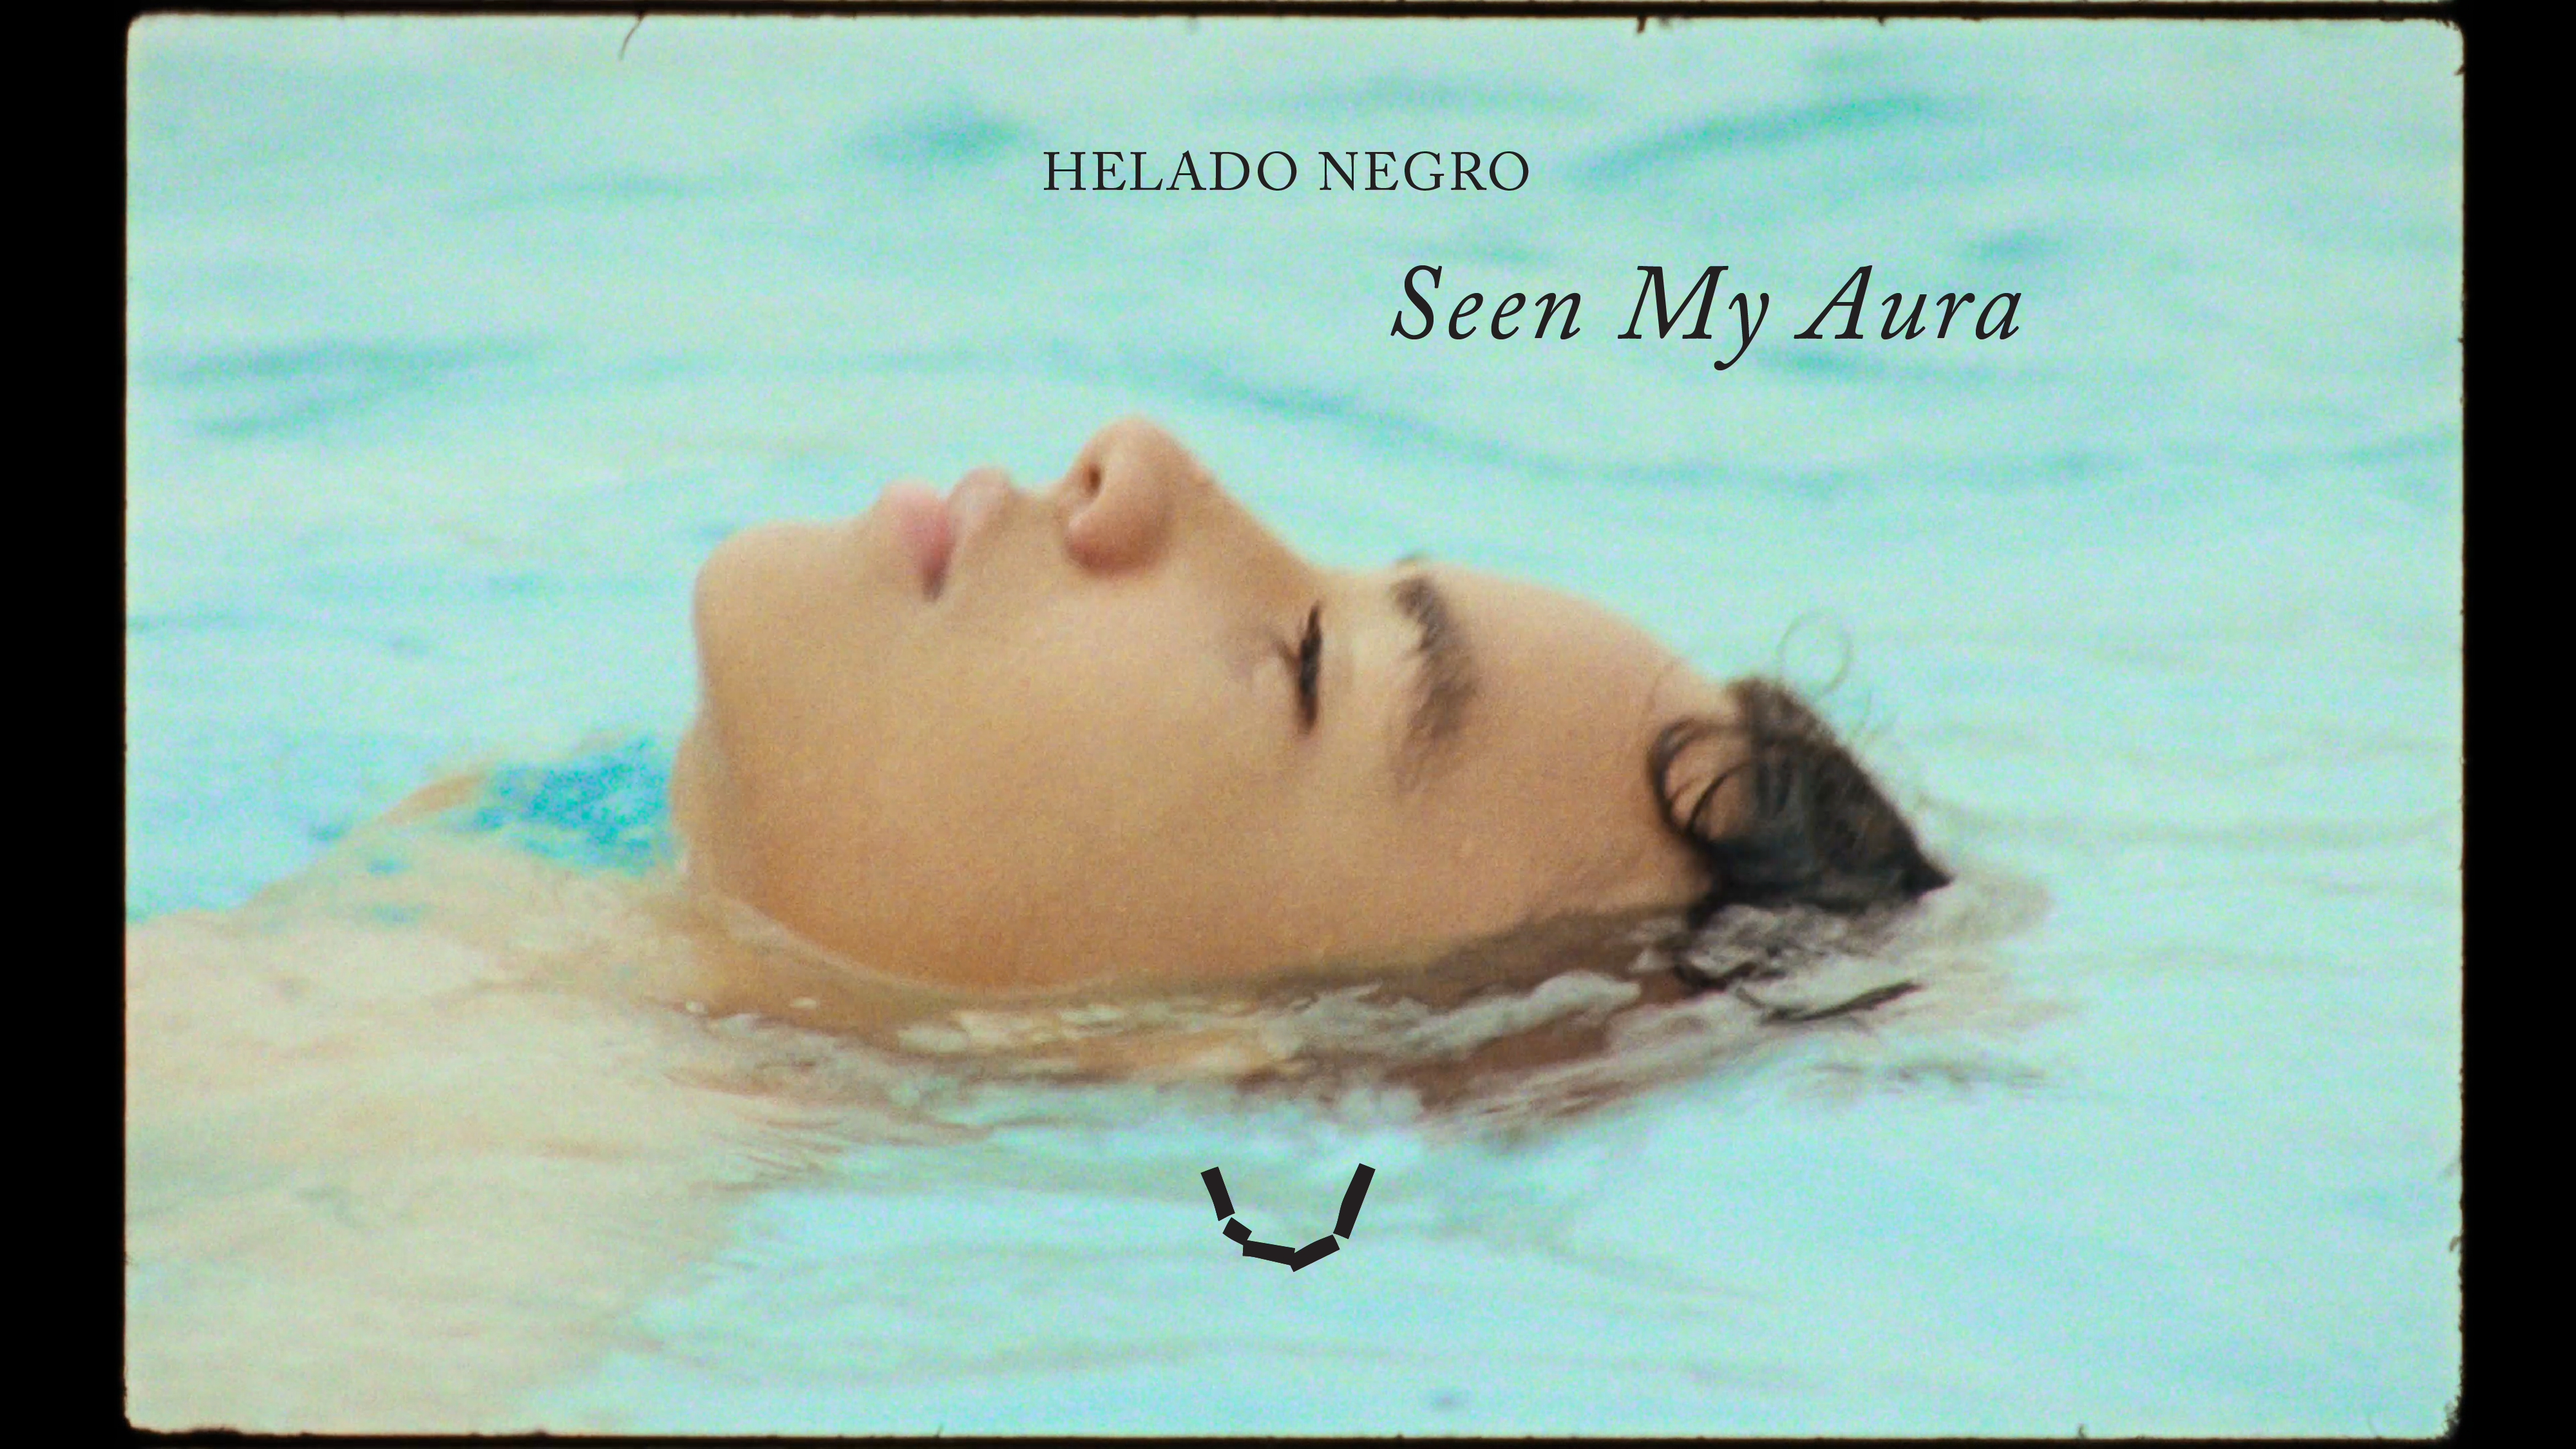 Link to Video for Helado Negro – Seen My Aura